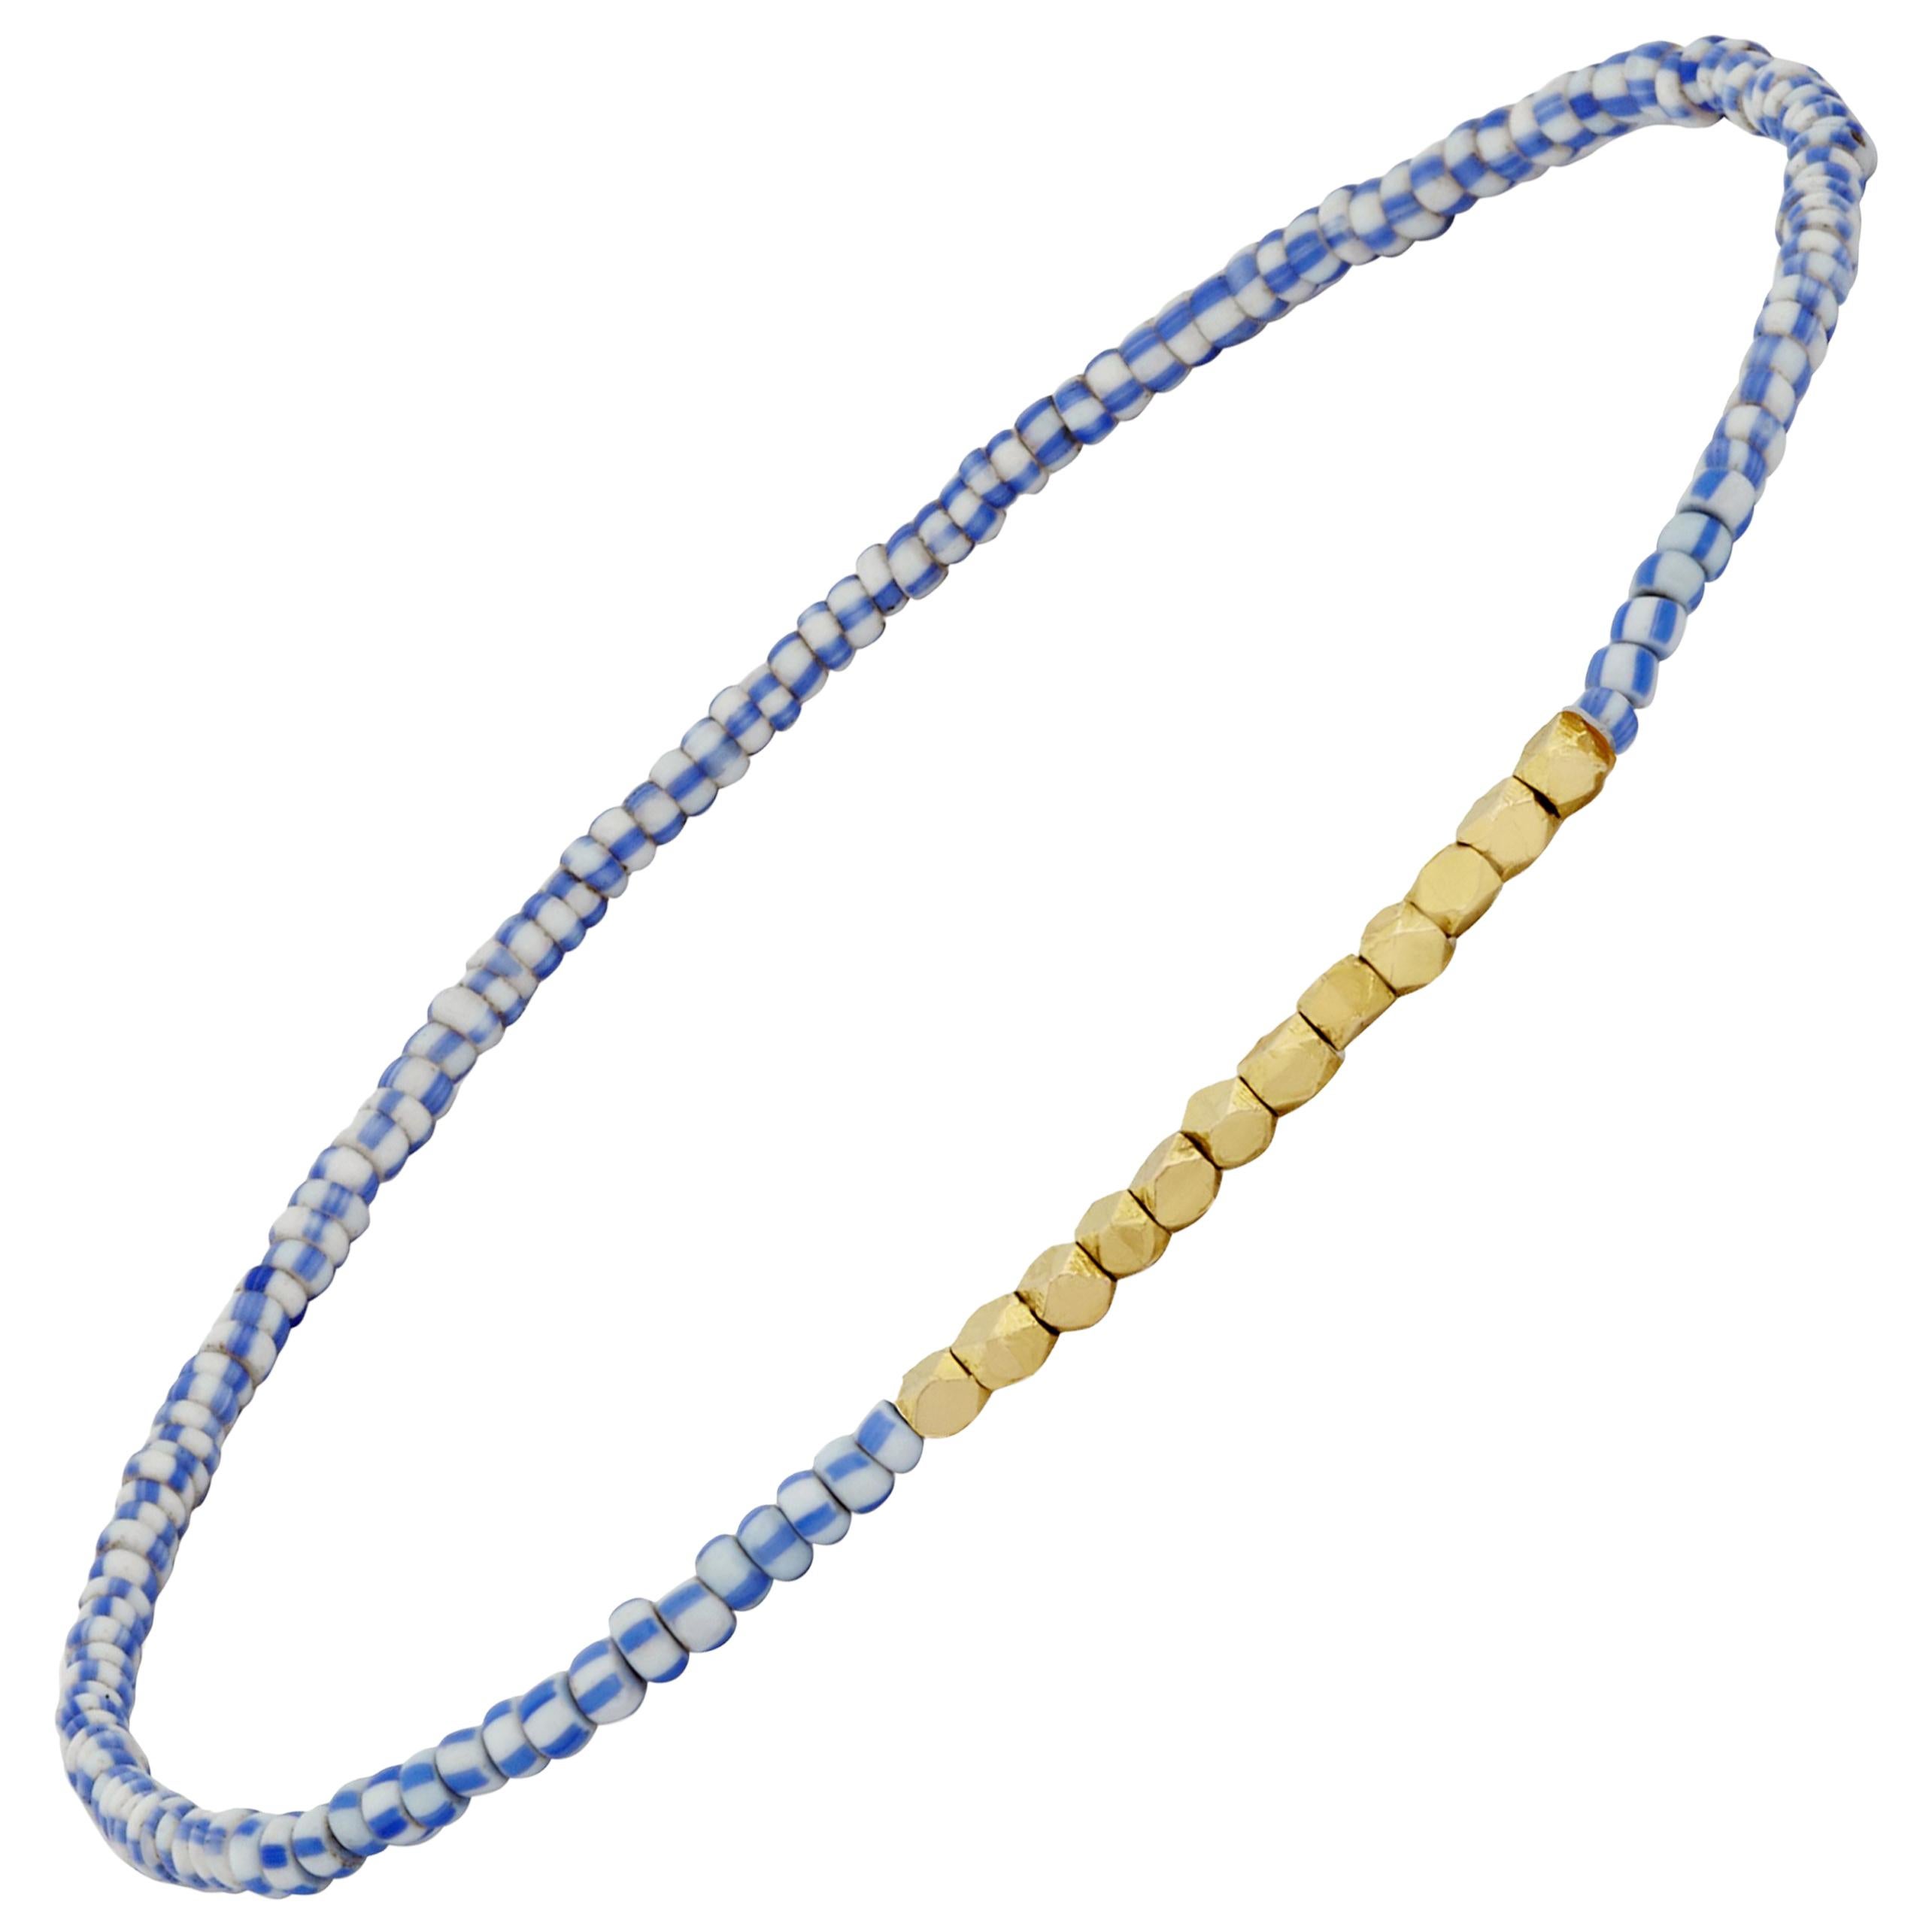 Vintage Blue and White Beaded Bracelet with Yellow Gold by Allison Bryan